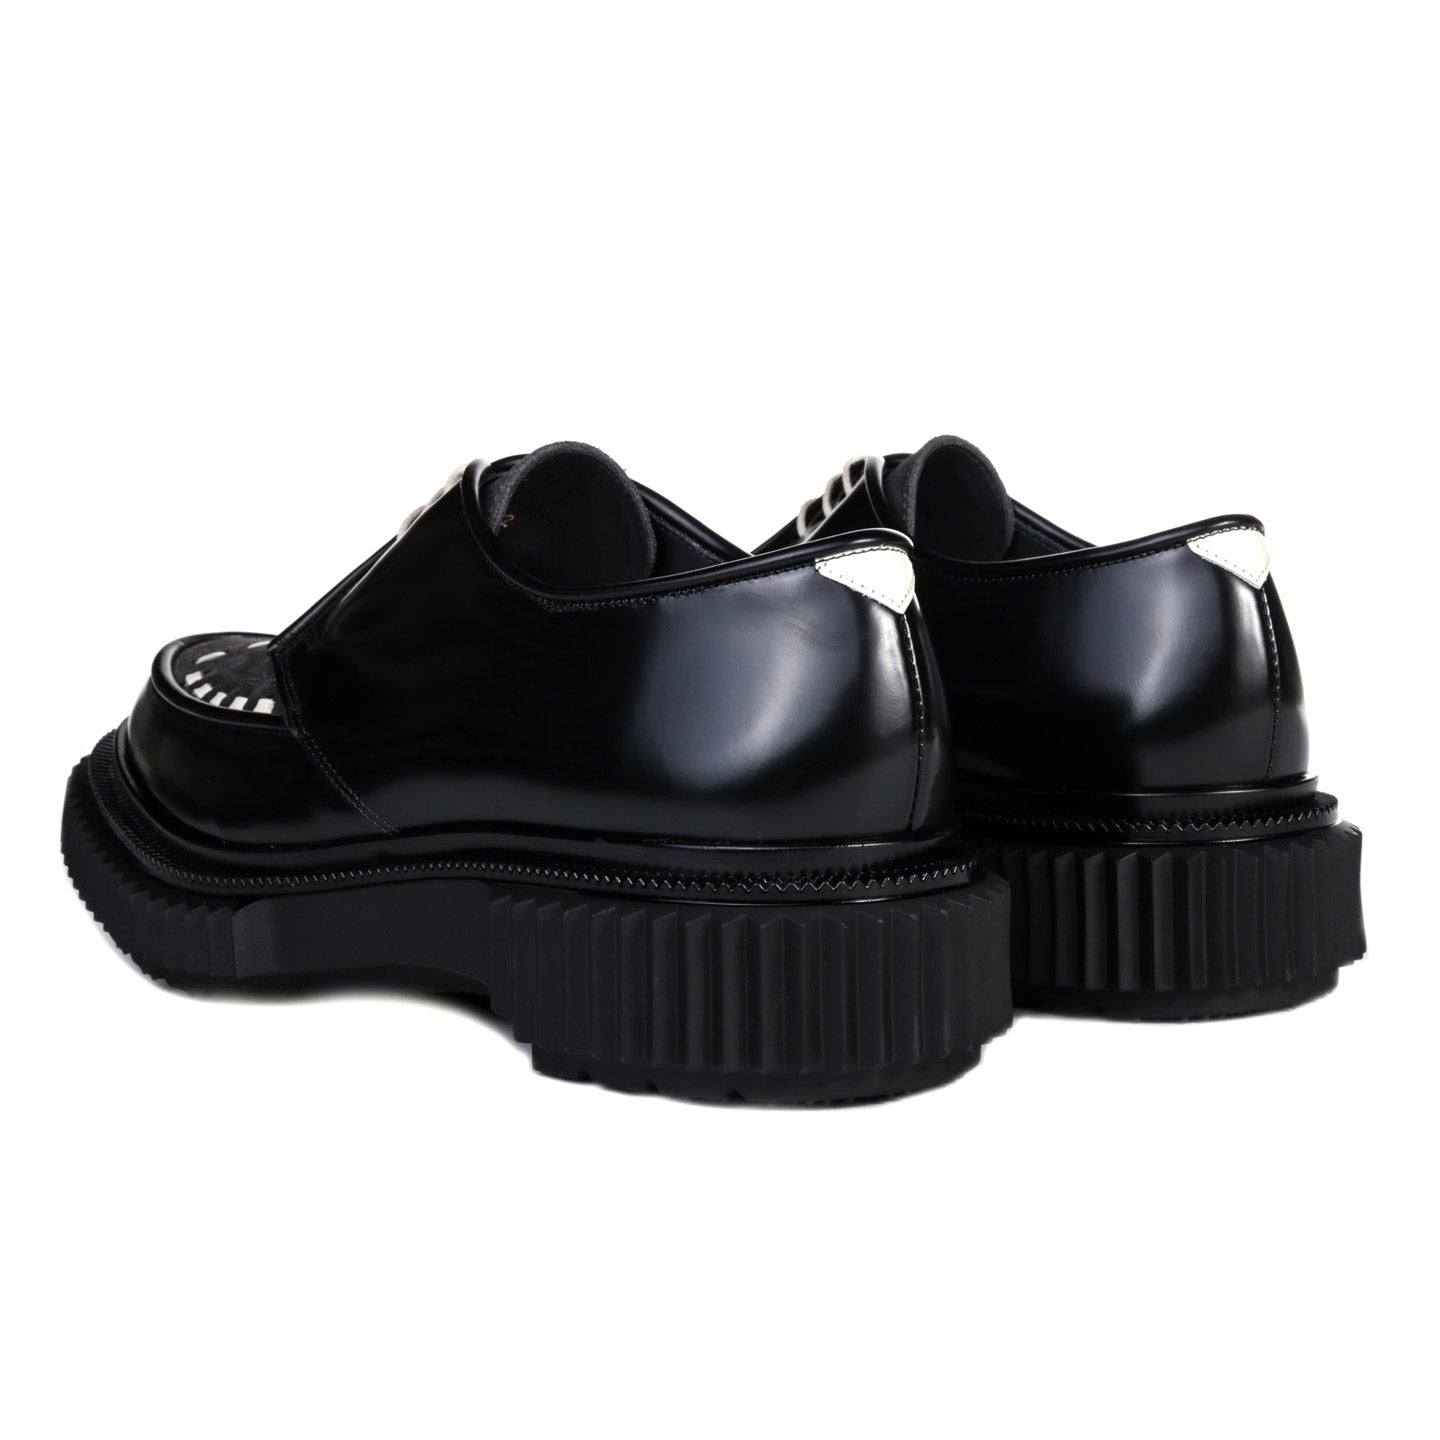 ADIEU UNDERCOVER TYPE 195 SHOE BLACK / CHARCOAL / IVORY